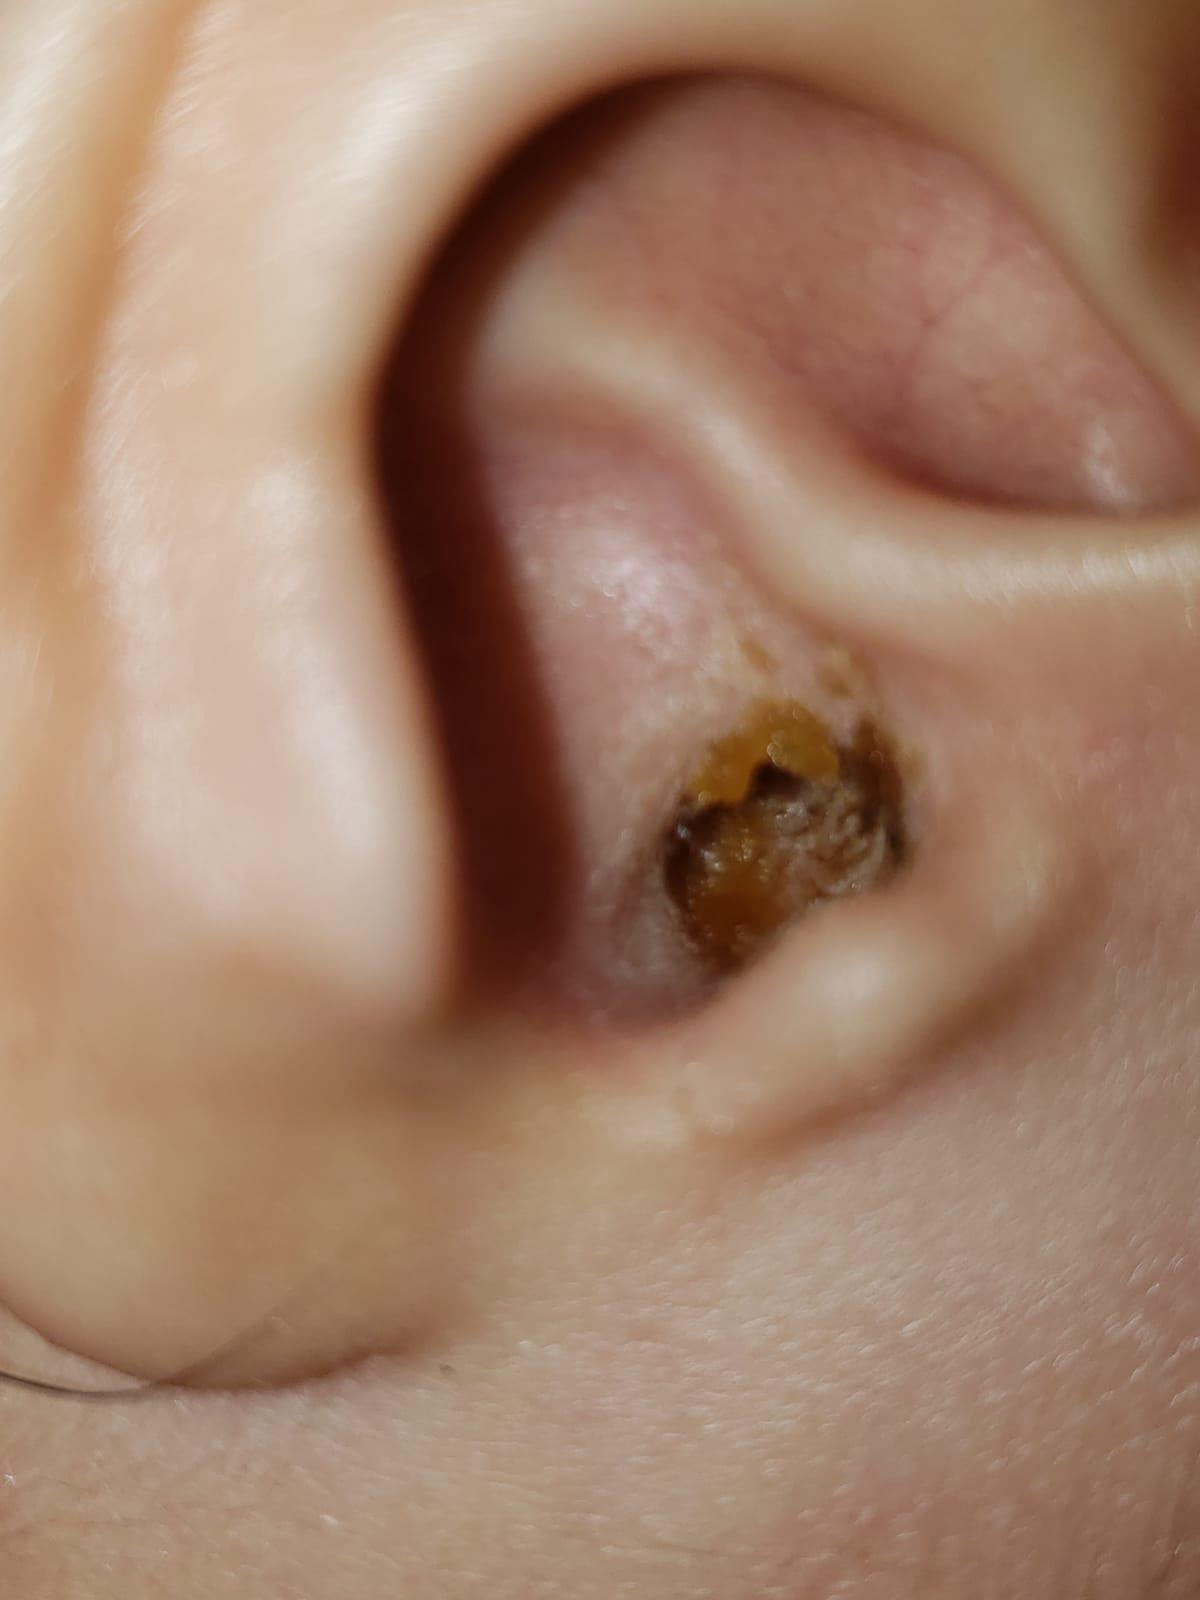 Two year old daughterâs ear, one week after ear infection (that was ...